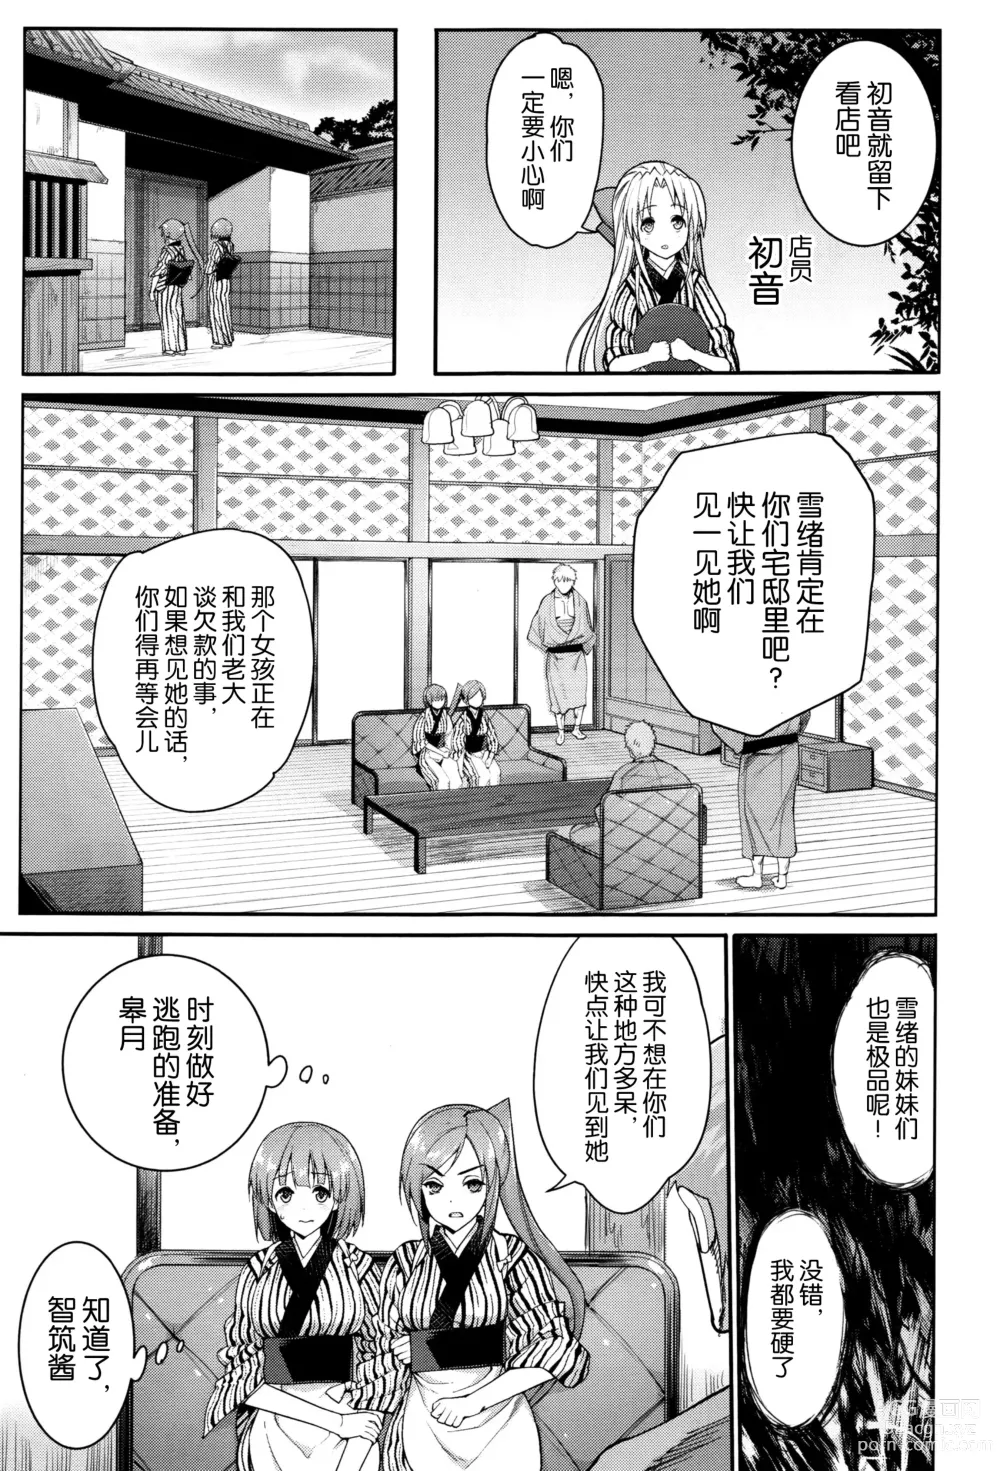 Page 26 of manga I Want to Rape the Hostess Chapter 1-4+New Year Sex